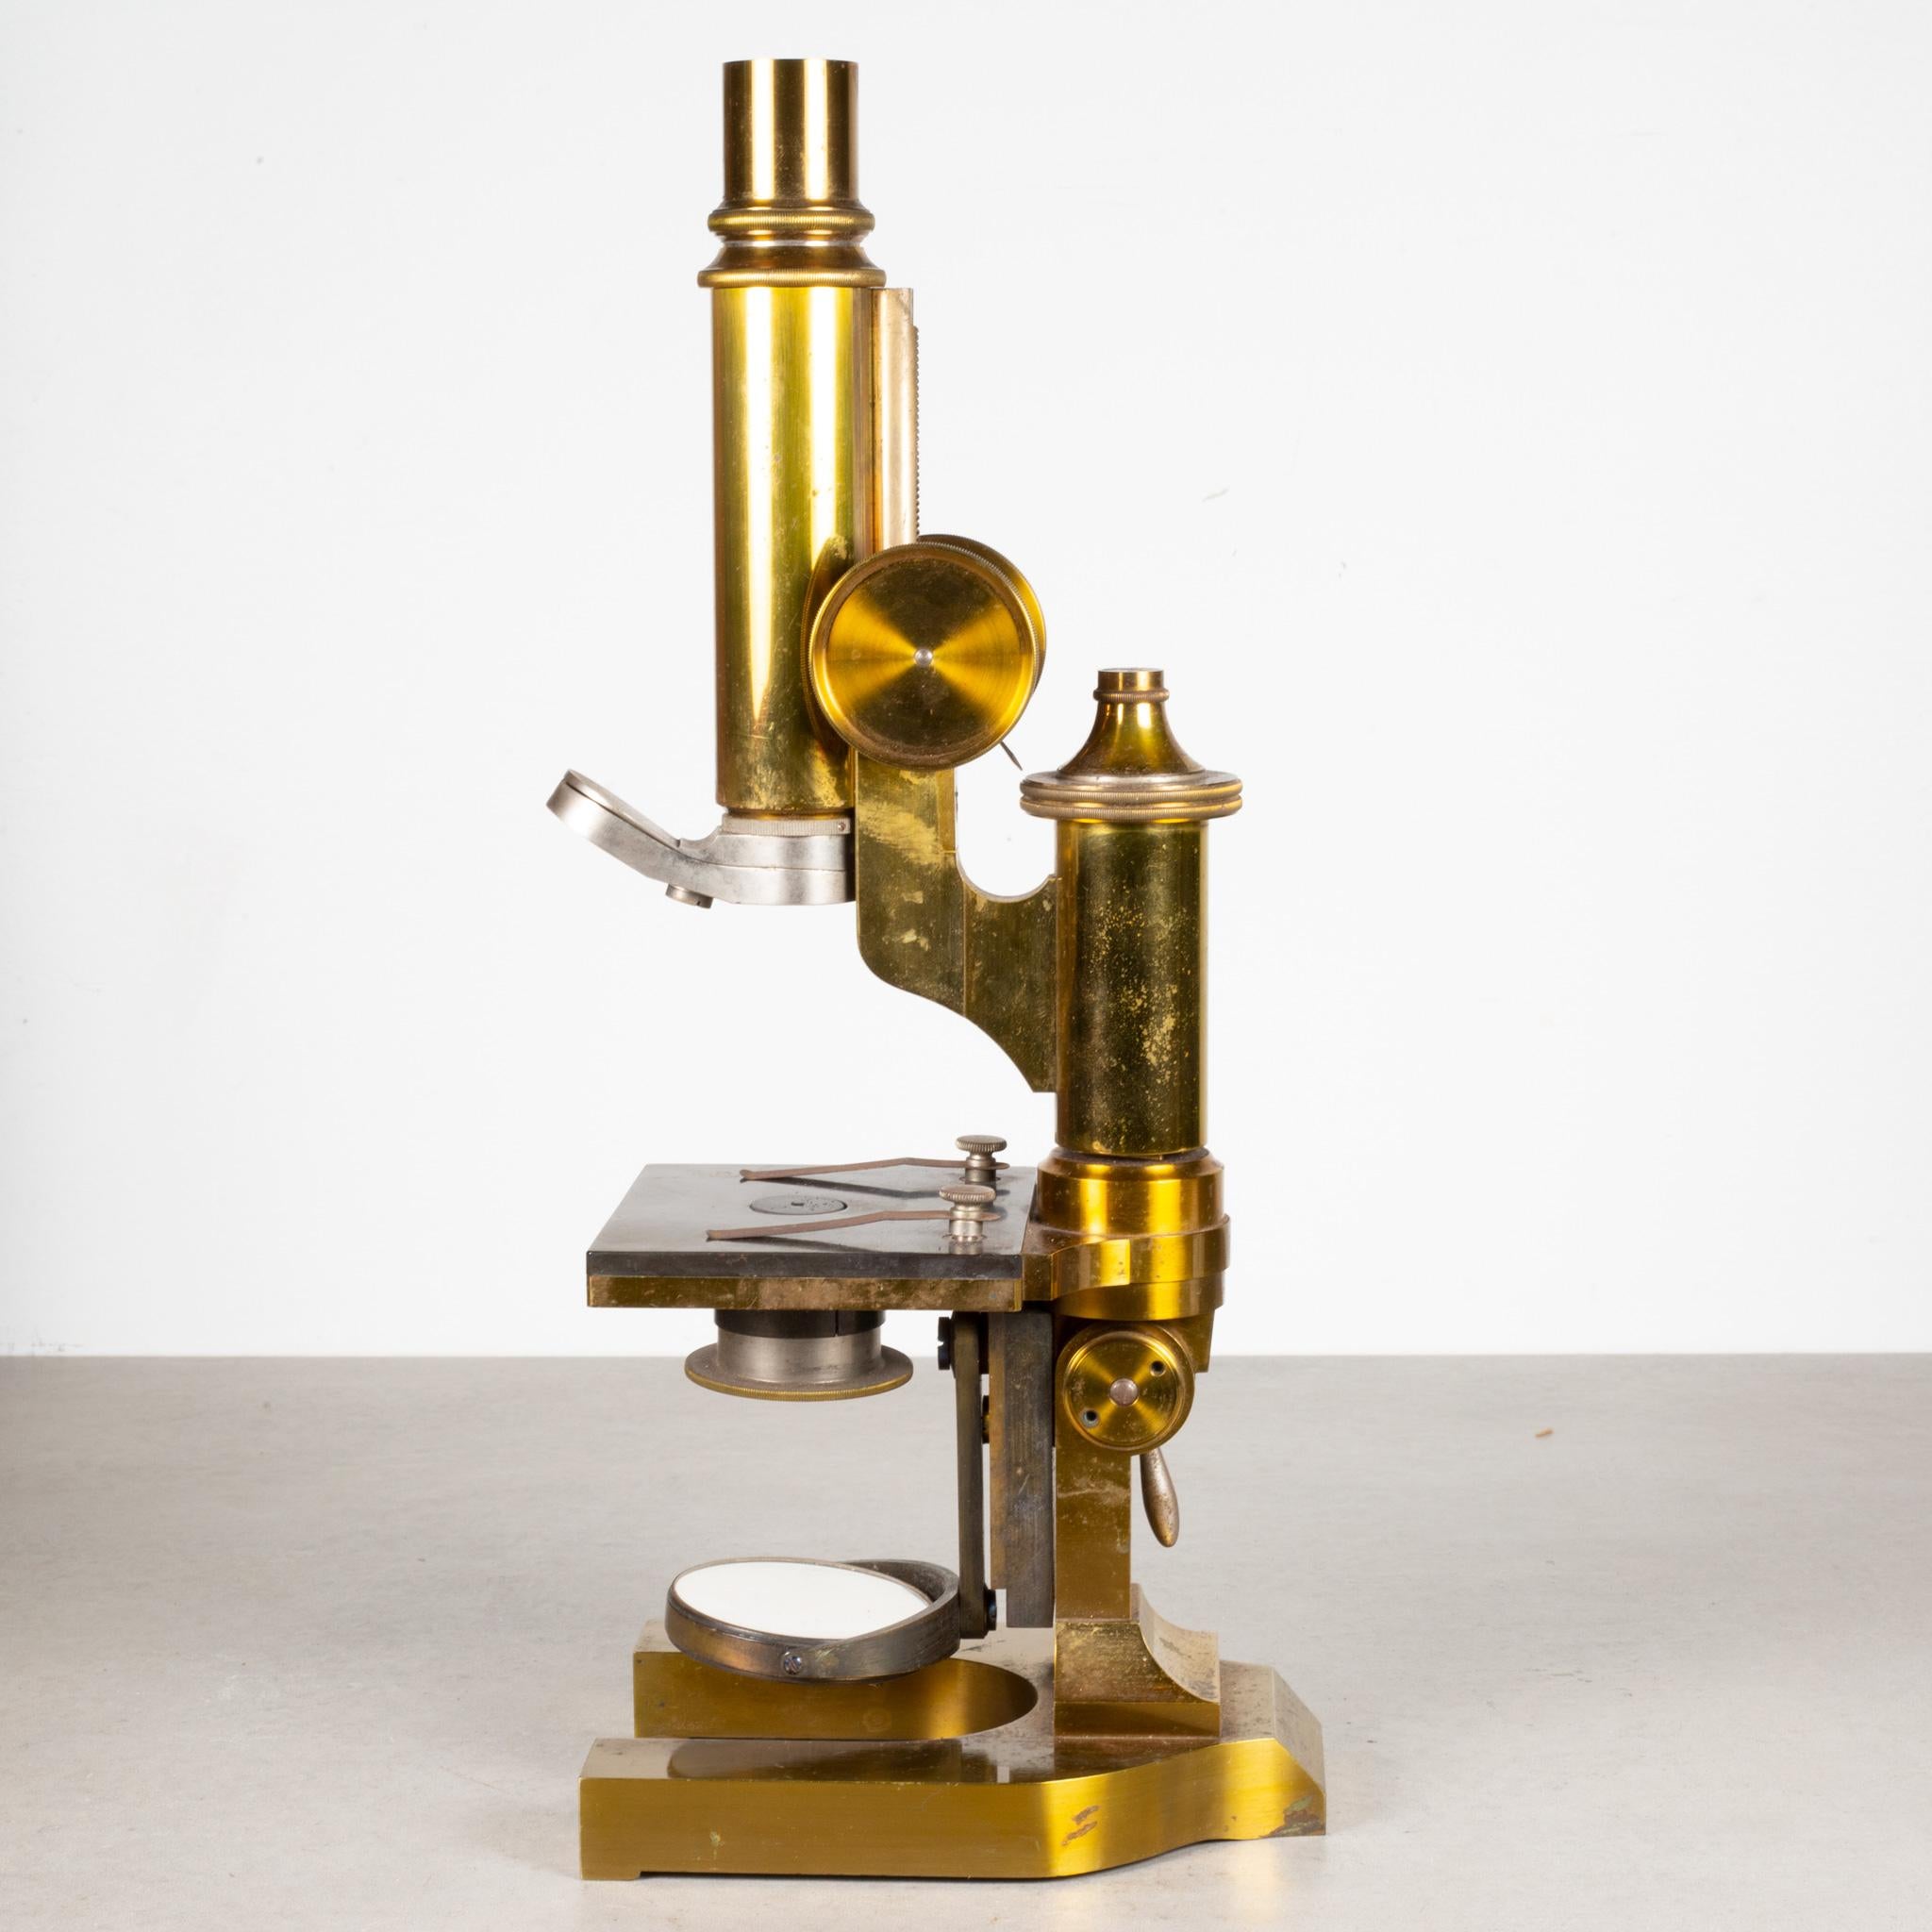 German 19th C. E. Leitz Wetzlar Solid Brass Microscope and Traveling Case, c.1892